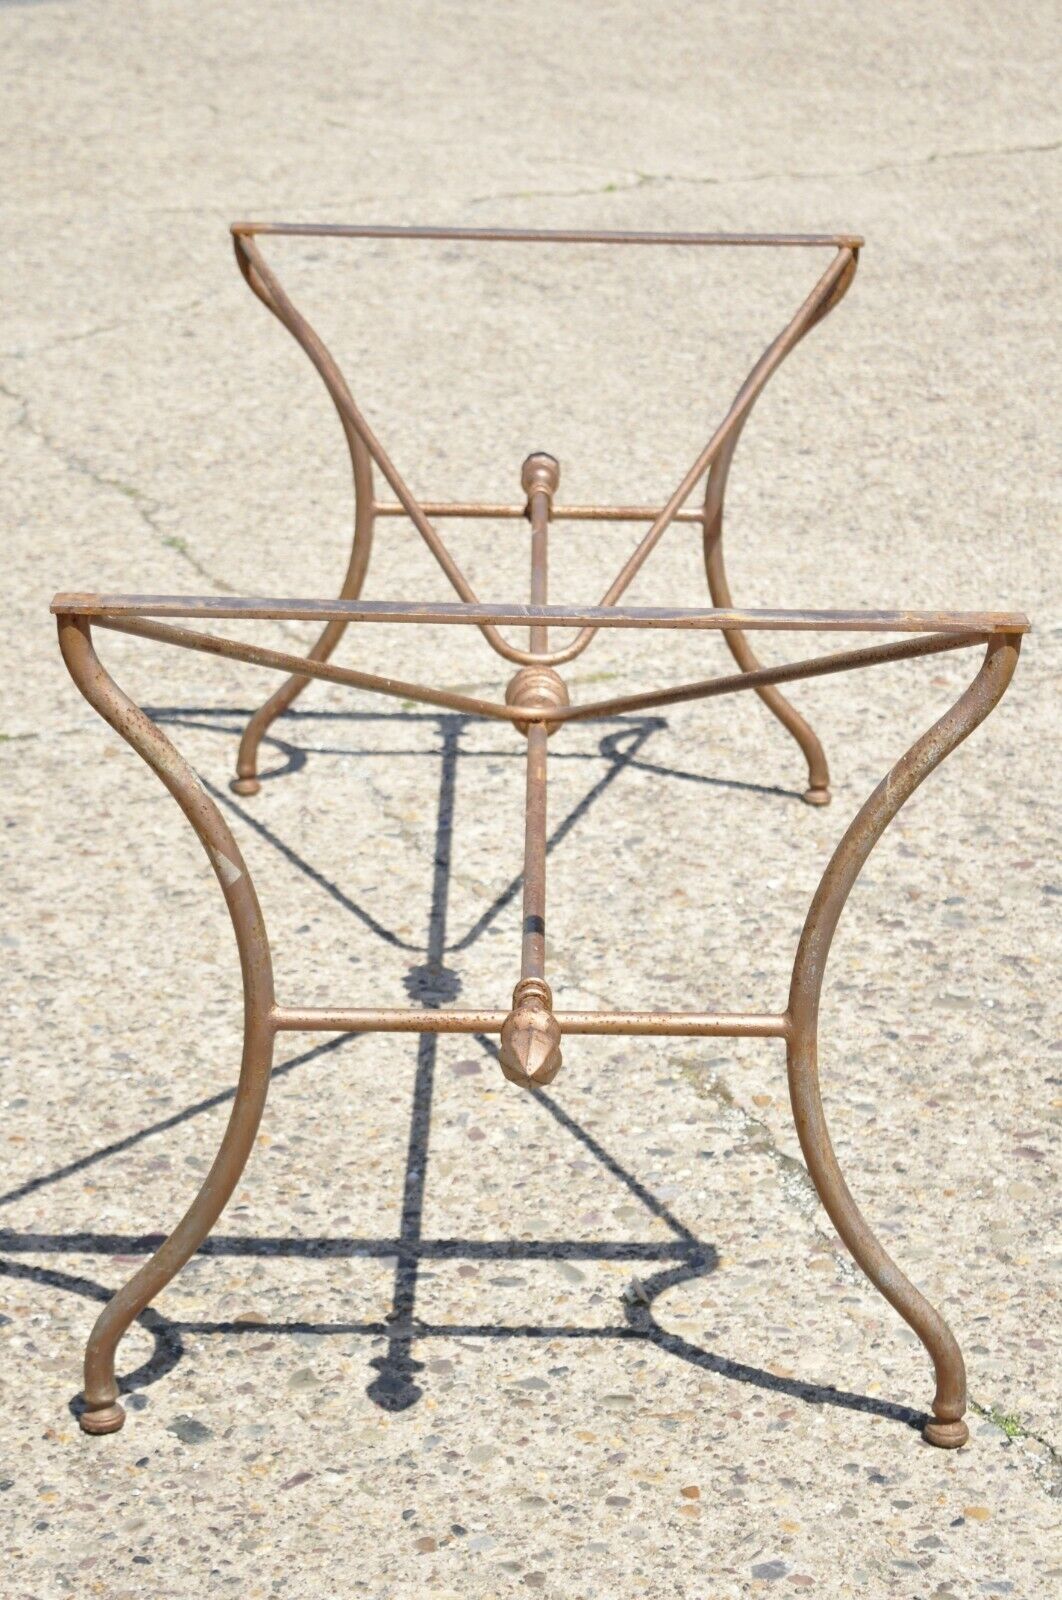 Large Vintage Wrought Iron Italian Regency Garden Patio Dining Pastry Table Base